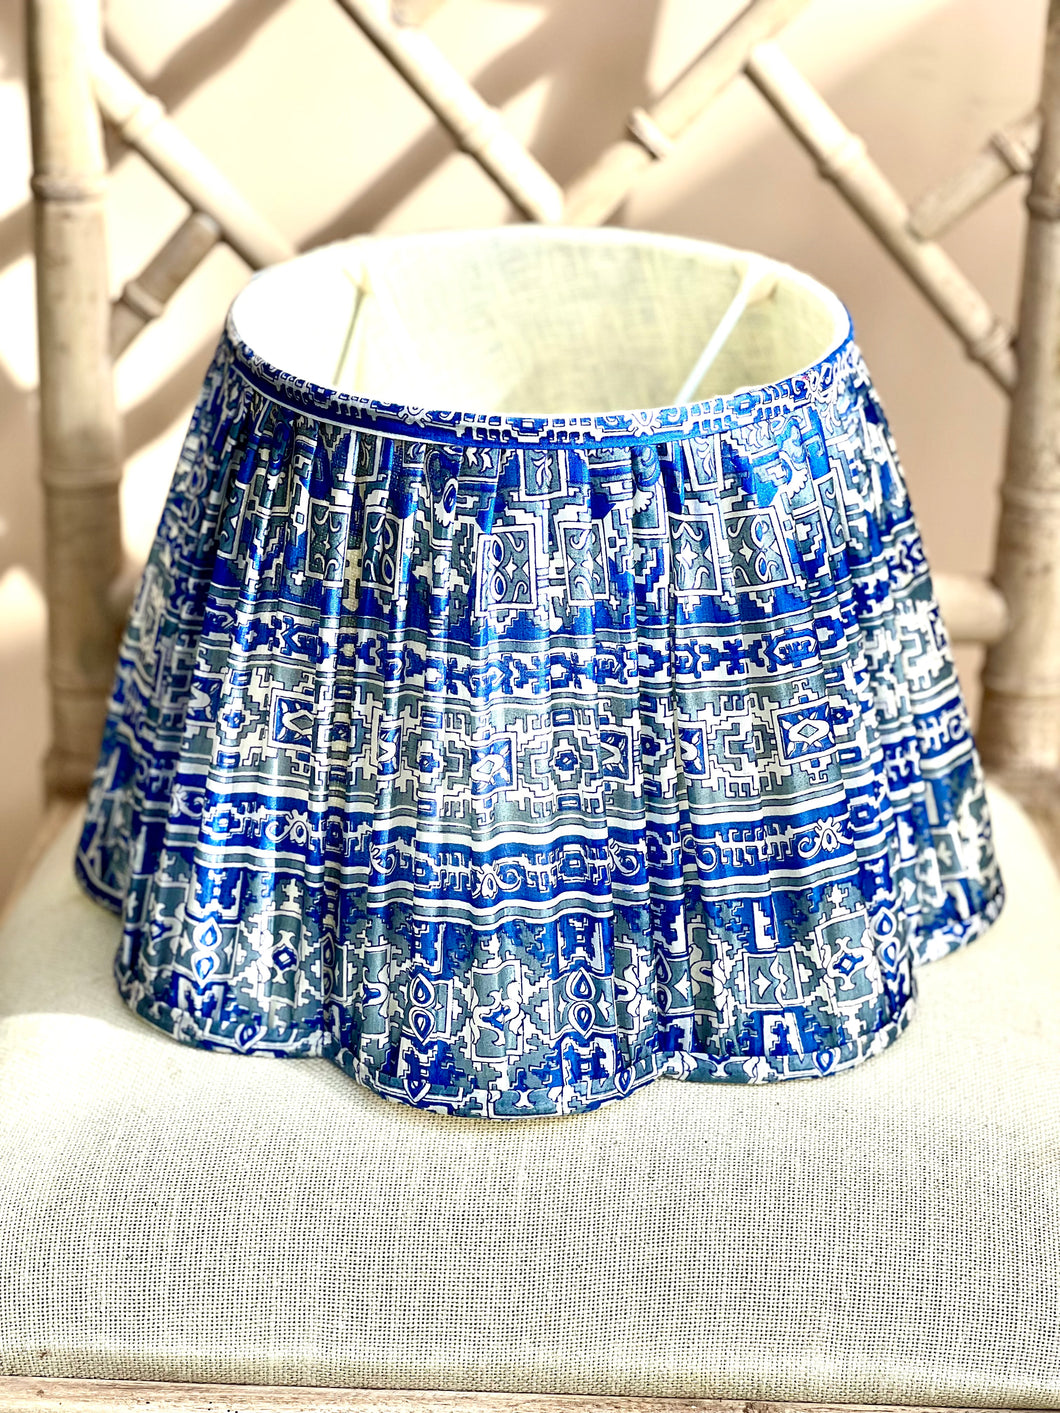 Vintage silk sari lampshade in royal and dusty blue tones daisy shape 14”